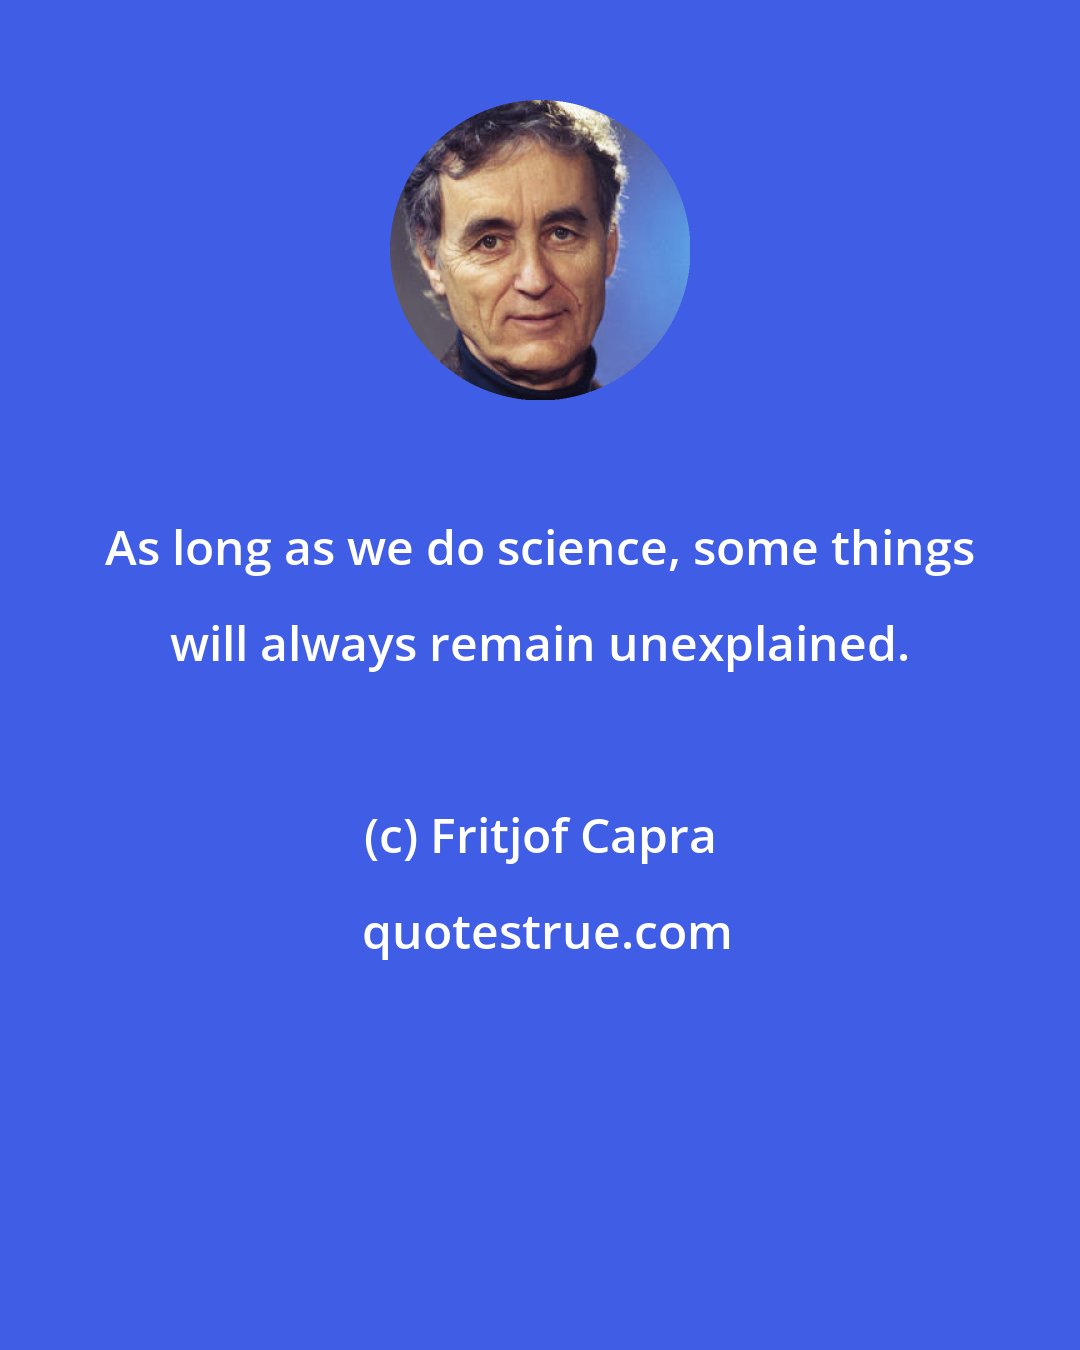 Fritjof Capra: As long as we do science, some things will always remain unexplained.